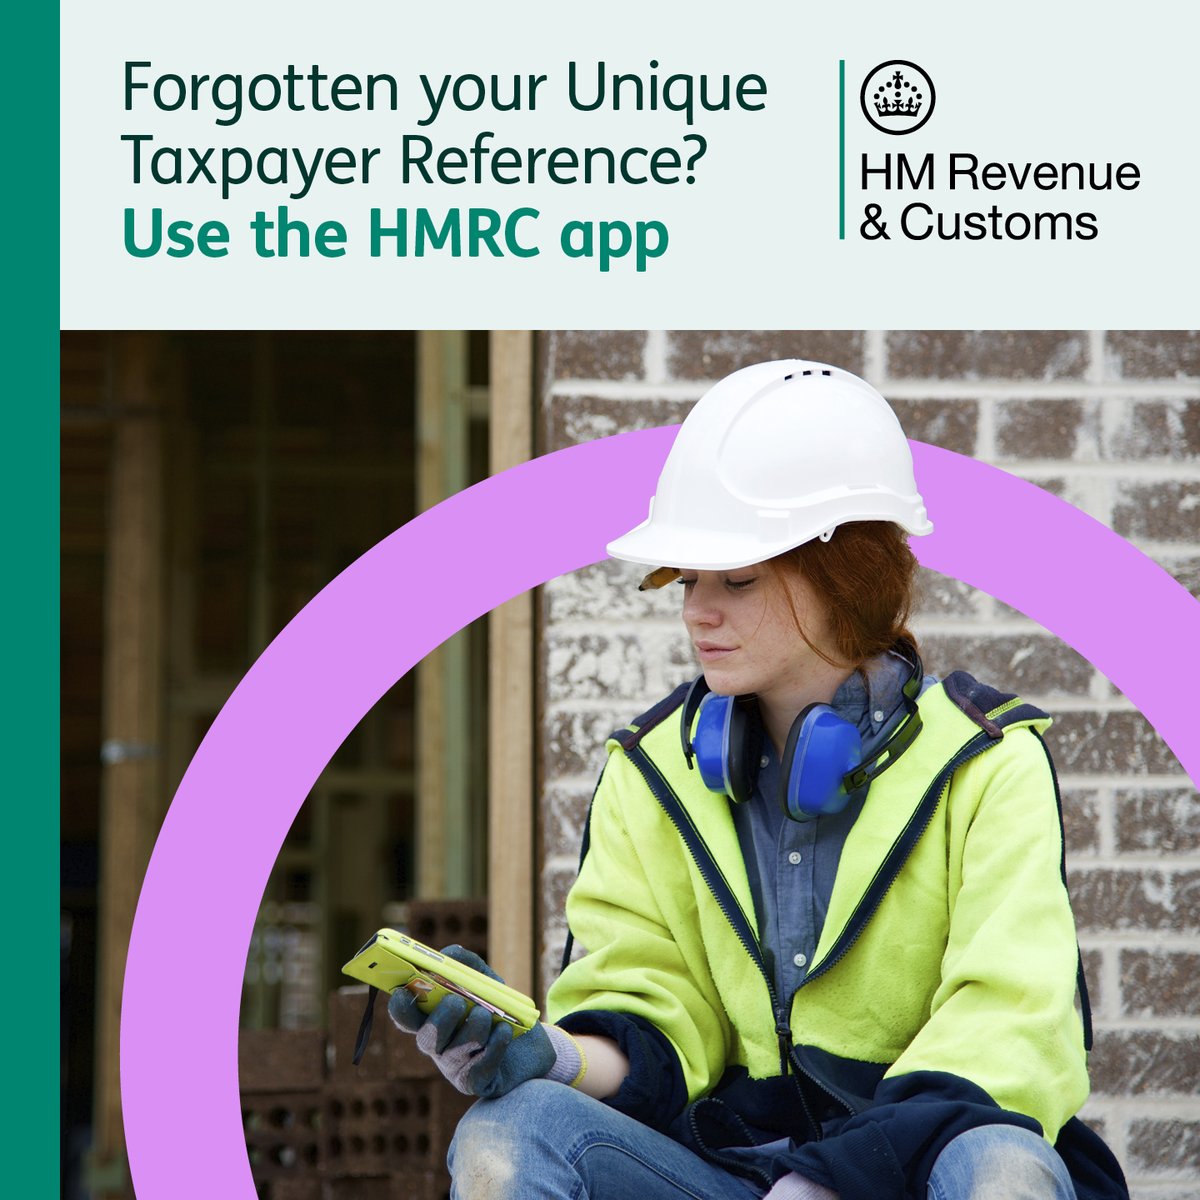 Need to register for VAT? 📣 You’ll need your Unique Taxpayer Reference. ✔️ Download the HMRC App today to access the info you need for your VAT registration quickly and easily, without needing to call us. 📱 iOS - ow.ly/G34a50QrJtX Android - ow.ly/xq8950QrJtW